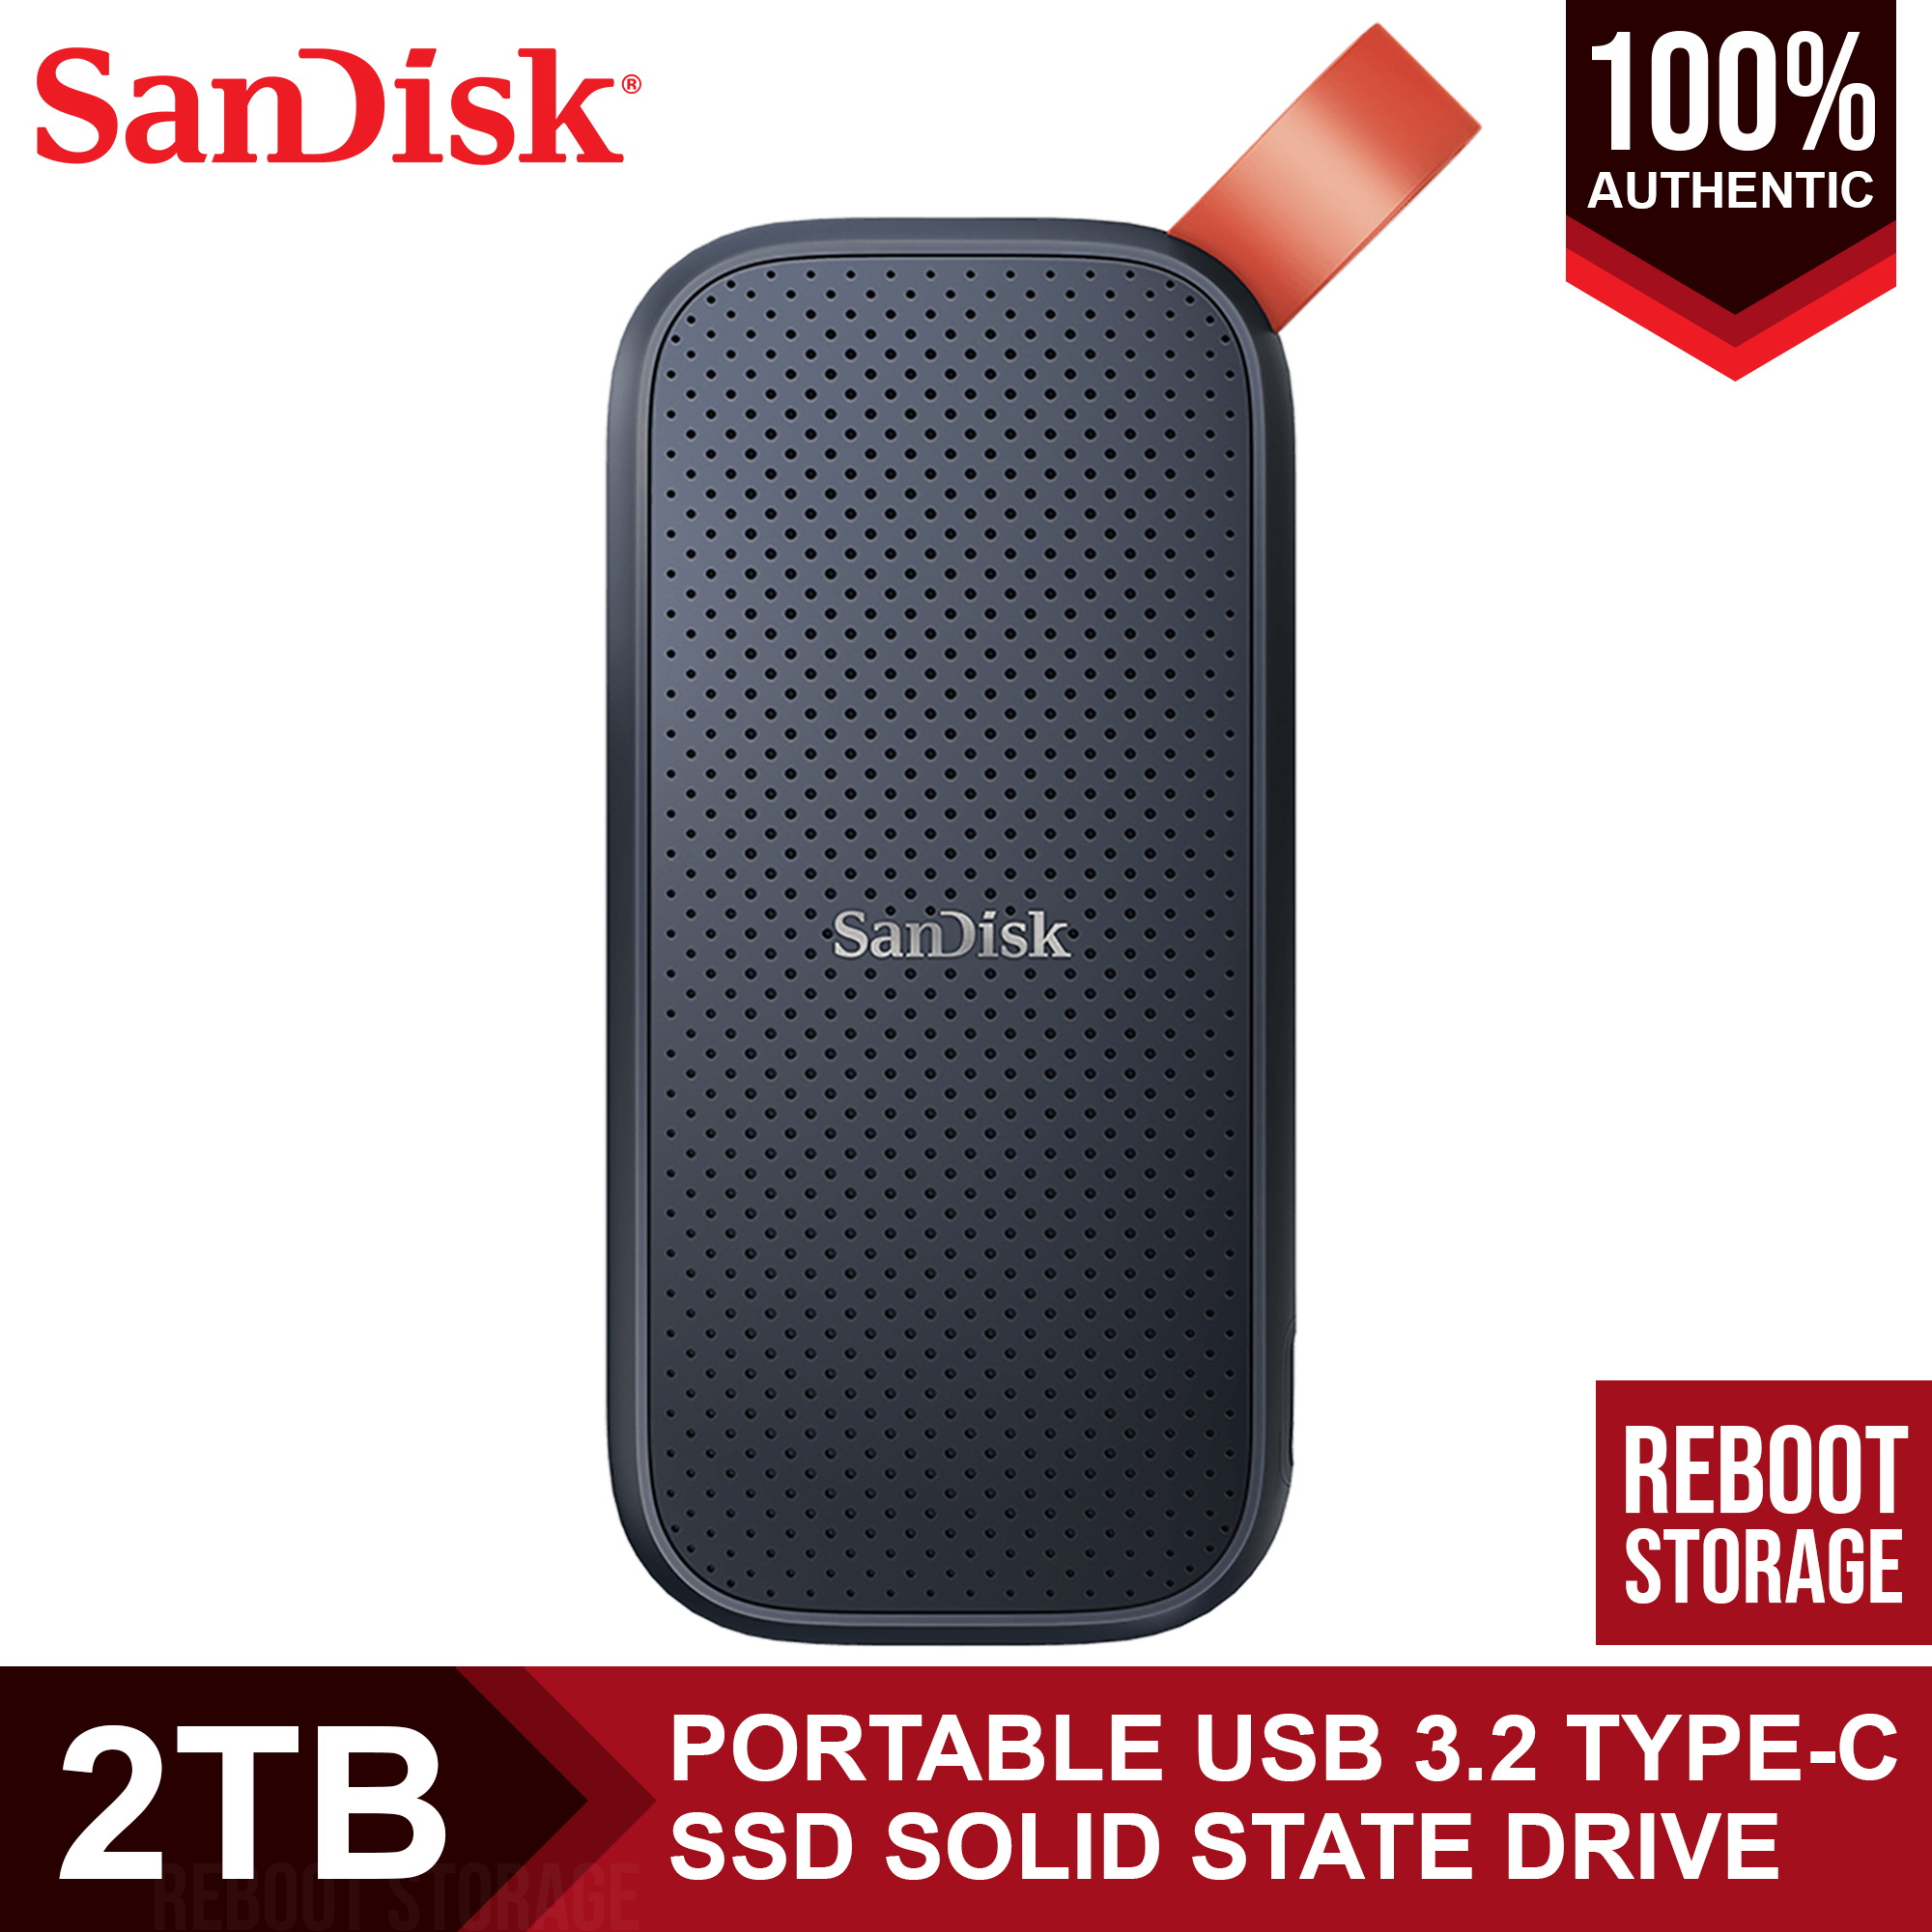 SanDisk 1TB Portable SSD external SSD USB 3.2 Gen 2 up to 520 MB/s read  speeds